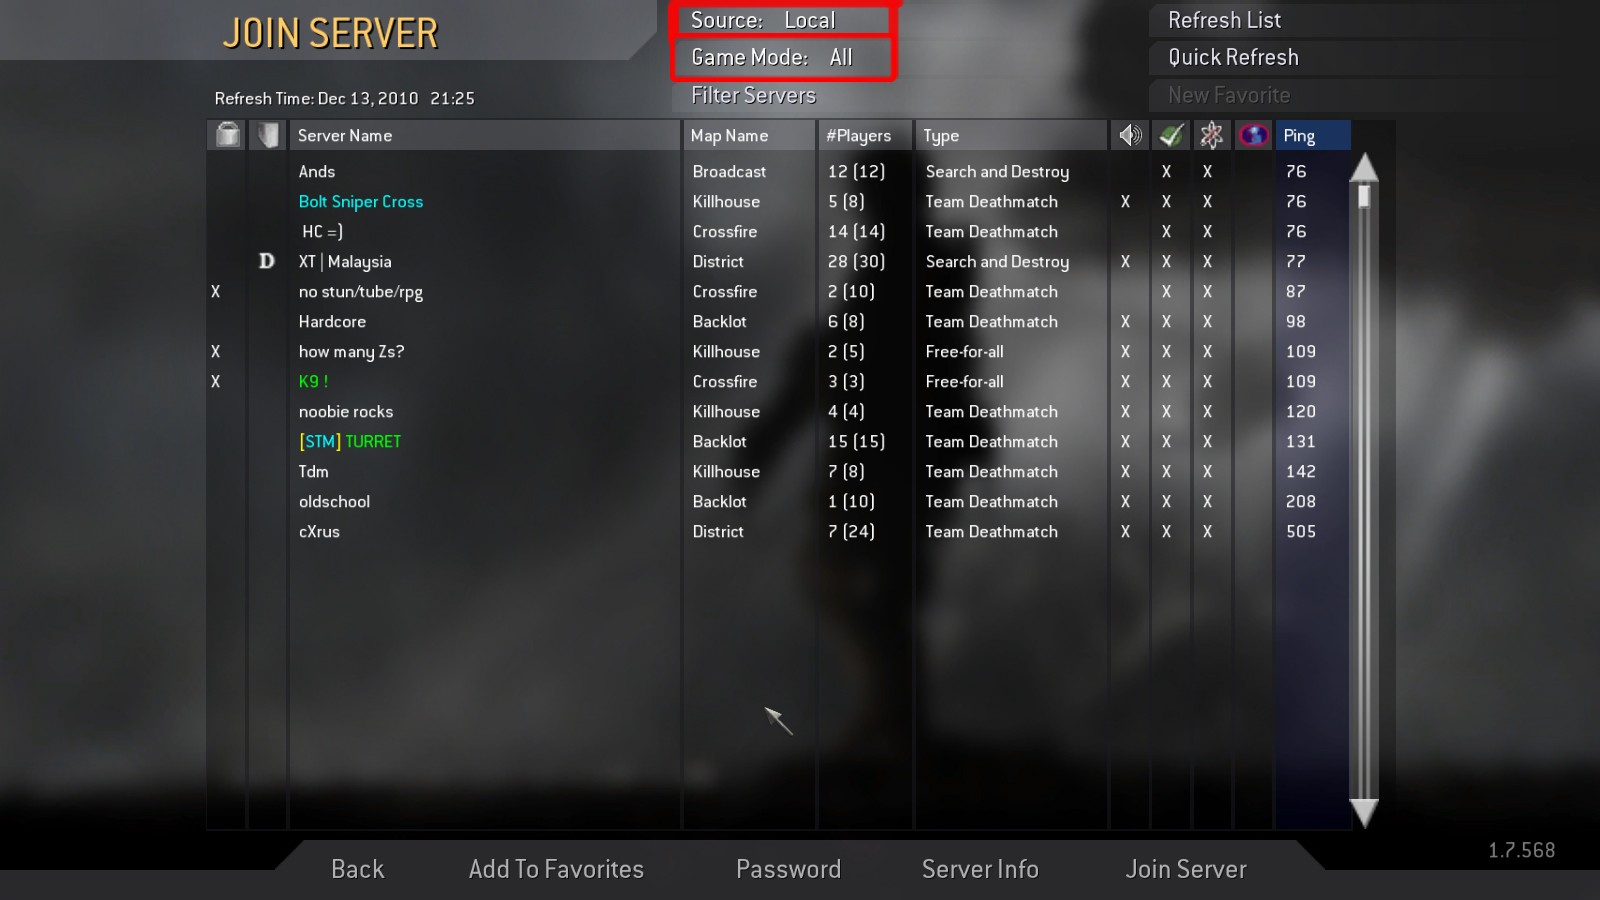 How to download, install patch and play COD4 on garena Source10